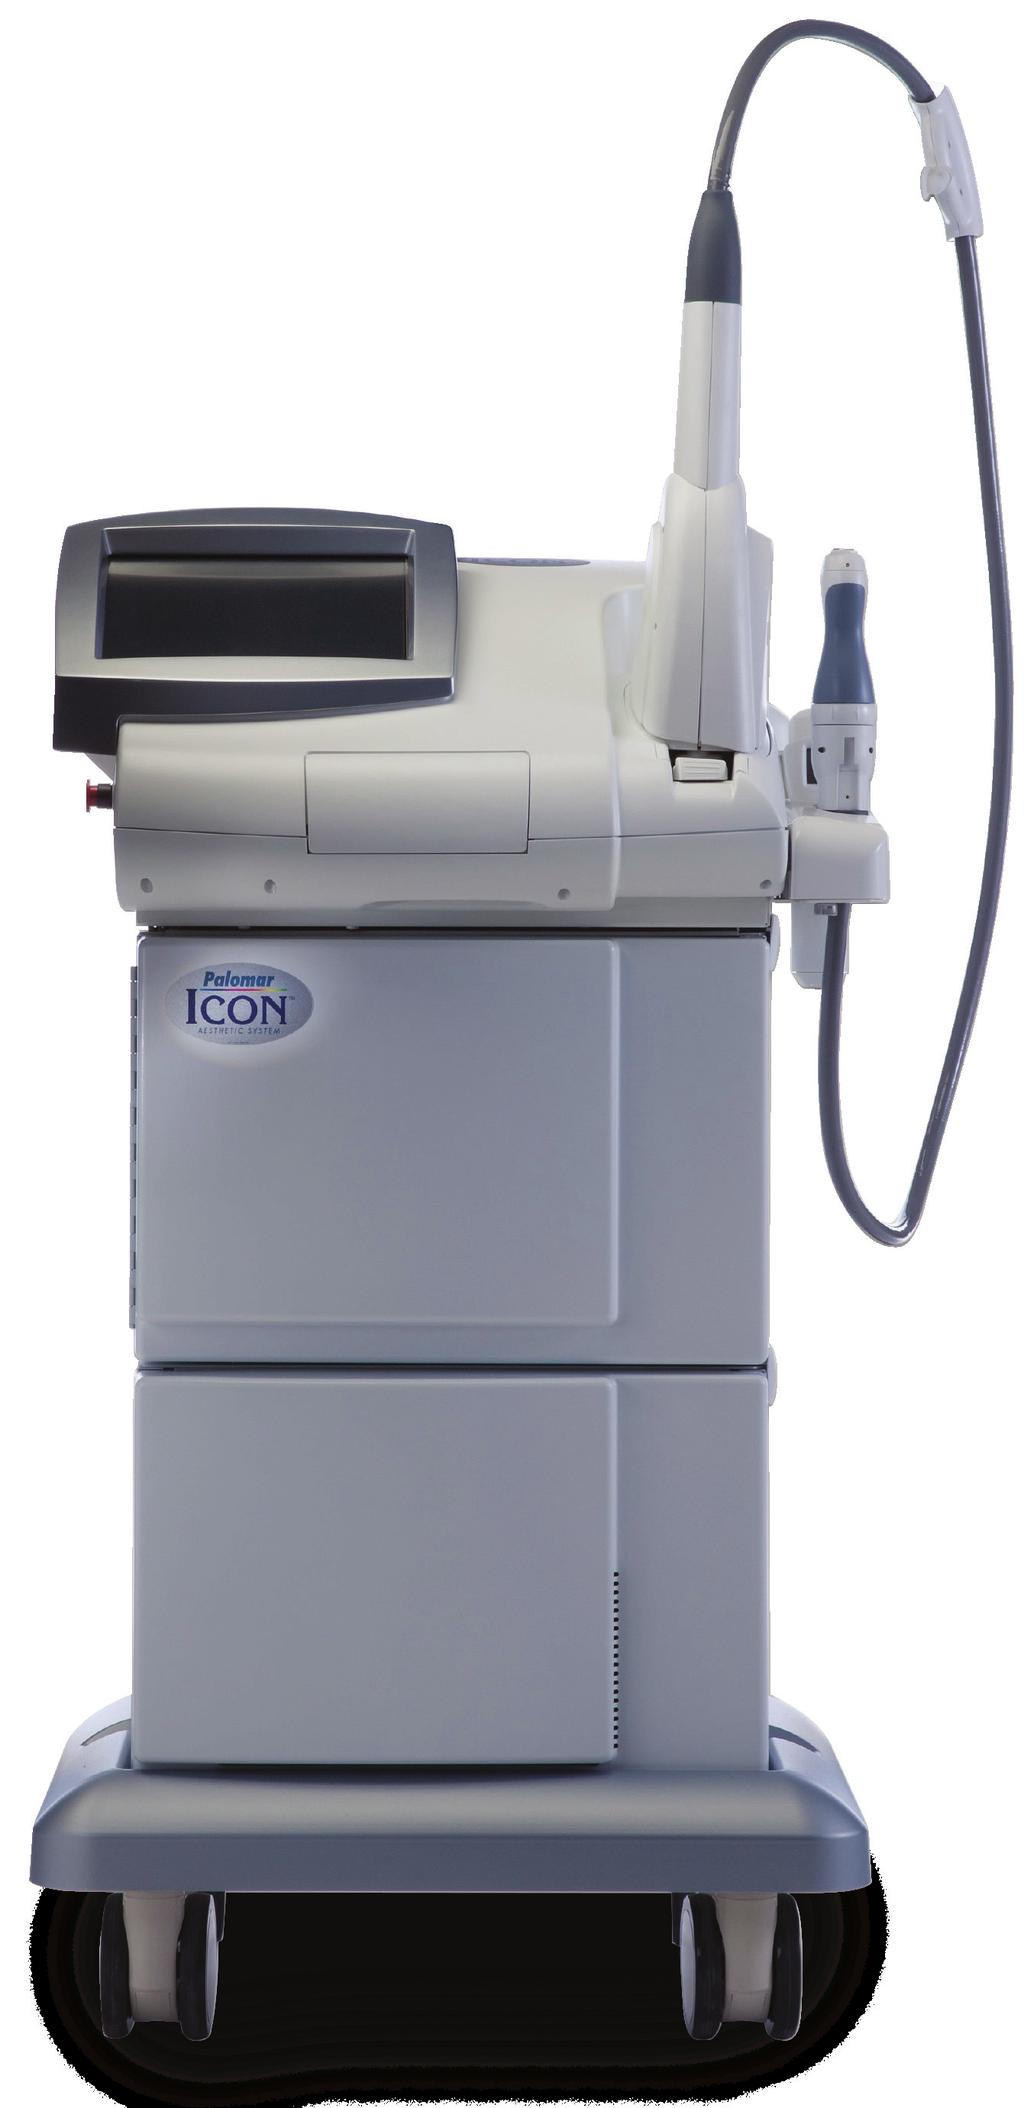 What makes Icon unique for your practice Introducing the Icon laser light system, the next generation in laser light aesthetic systems with innovative and sophisticated functionality.